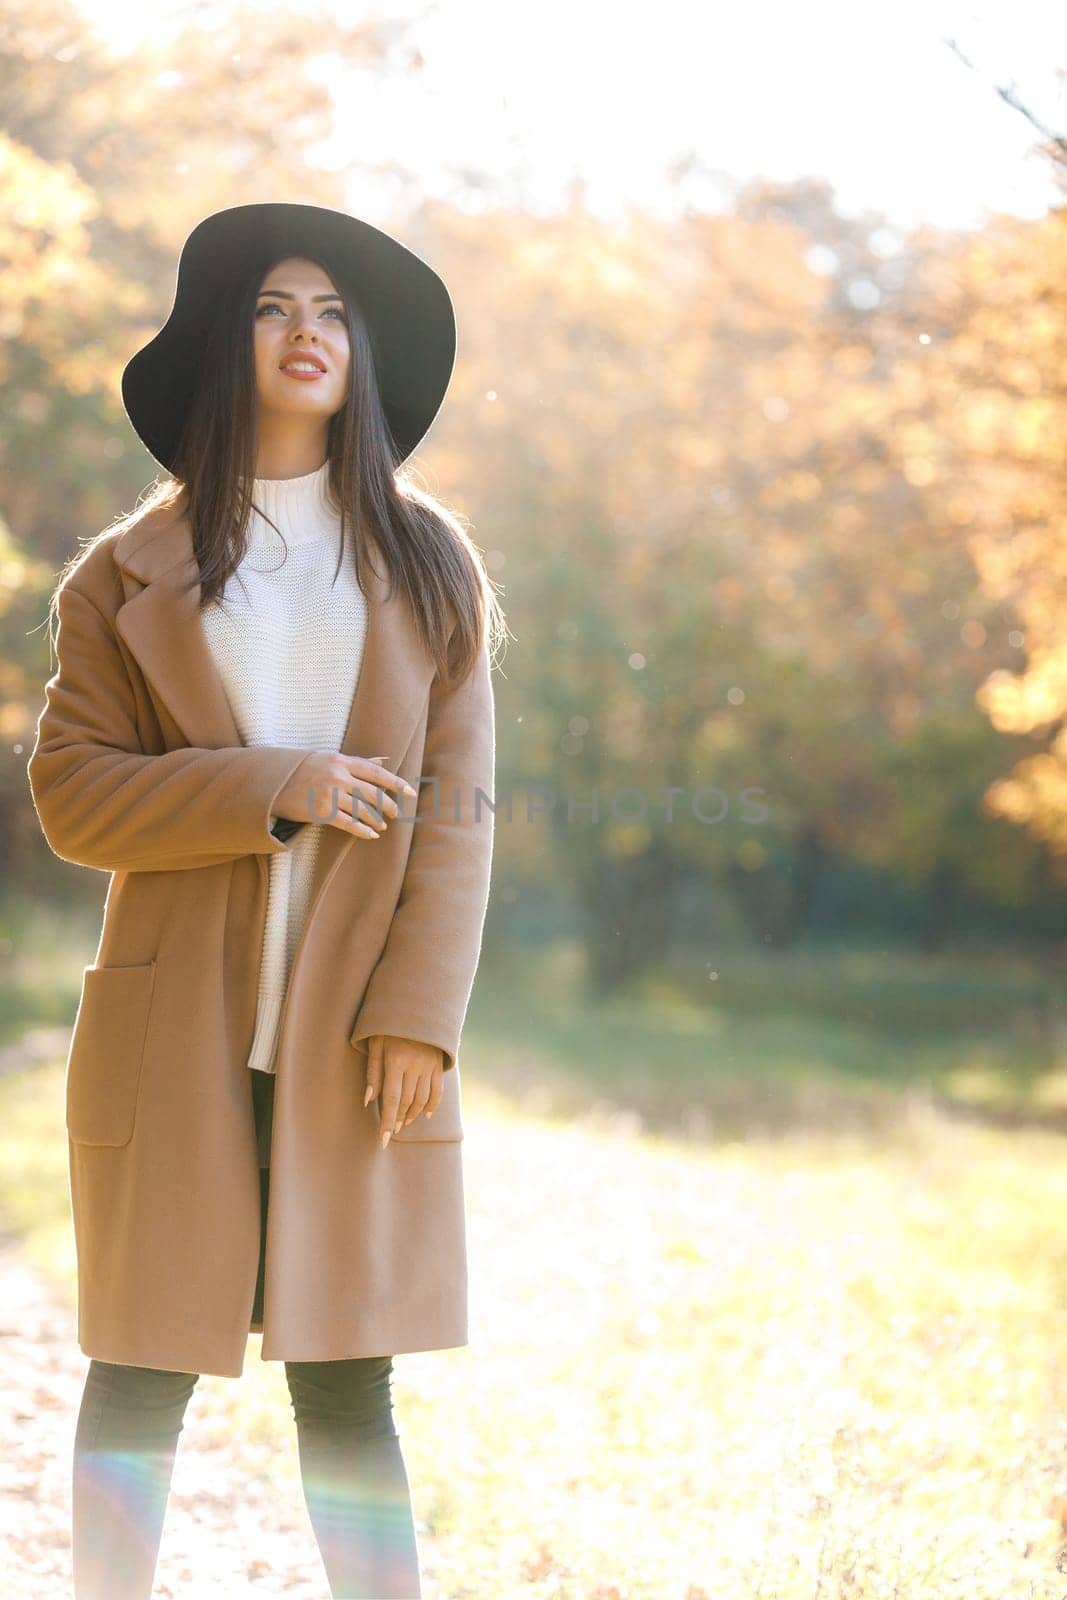 beautiful young woman in coat and black hat in park in the autumn. high key